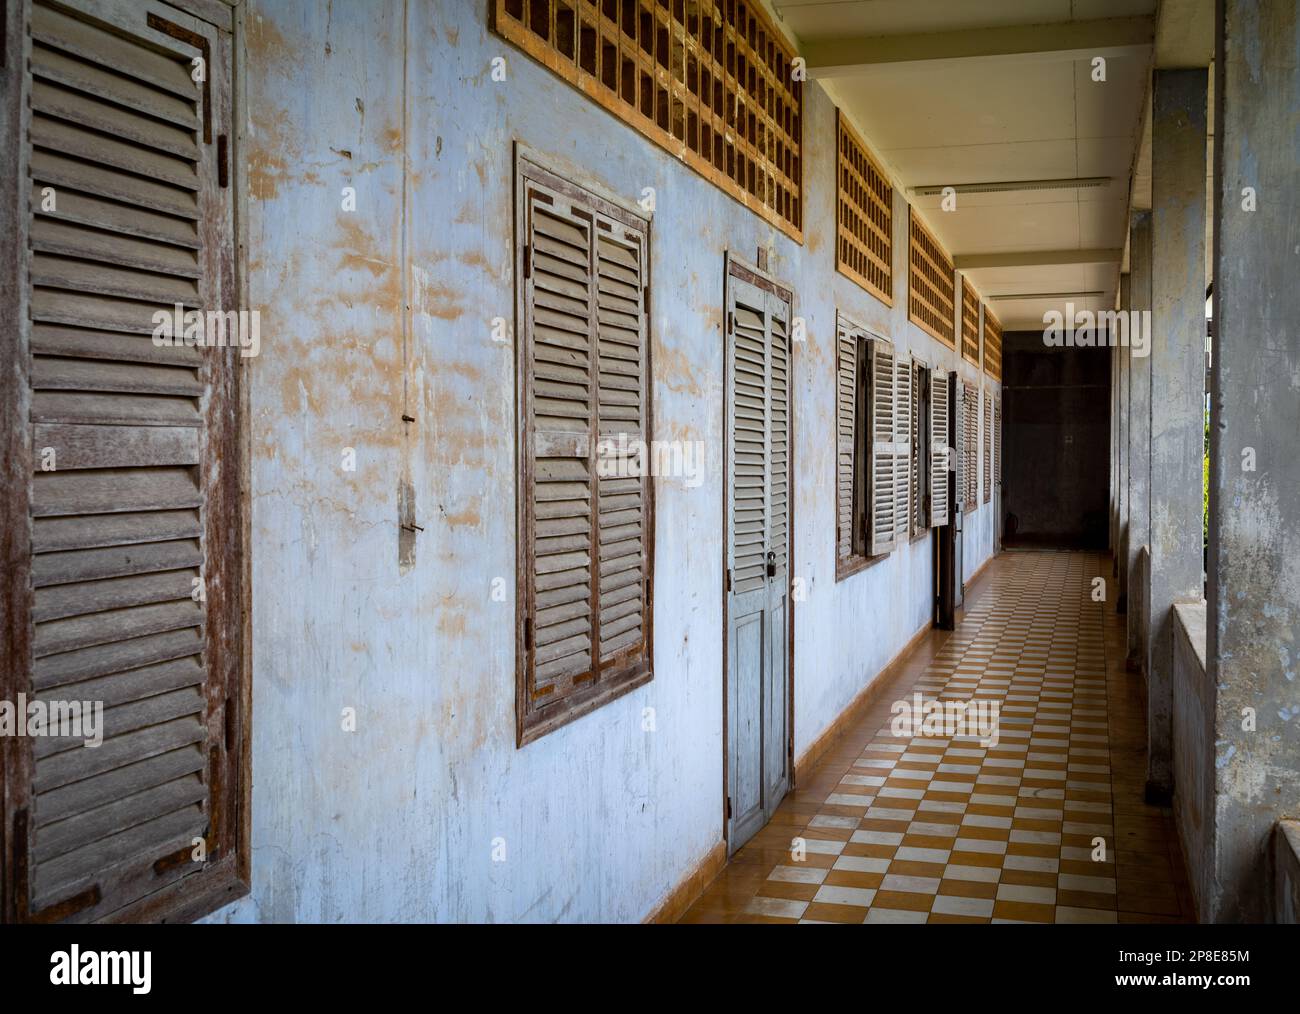 A corridor past former classrooms in the notorious Tuol Sleng S-21 torture and genocide prison museum in Phnom Penh, Cambodia. More than 18,000 peopl Stock Photo